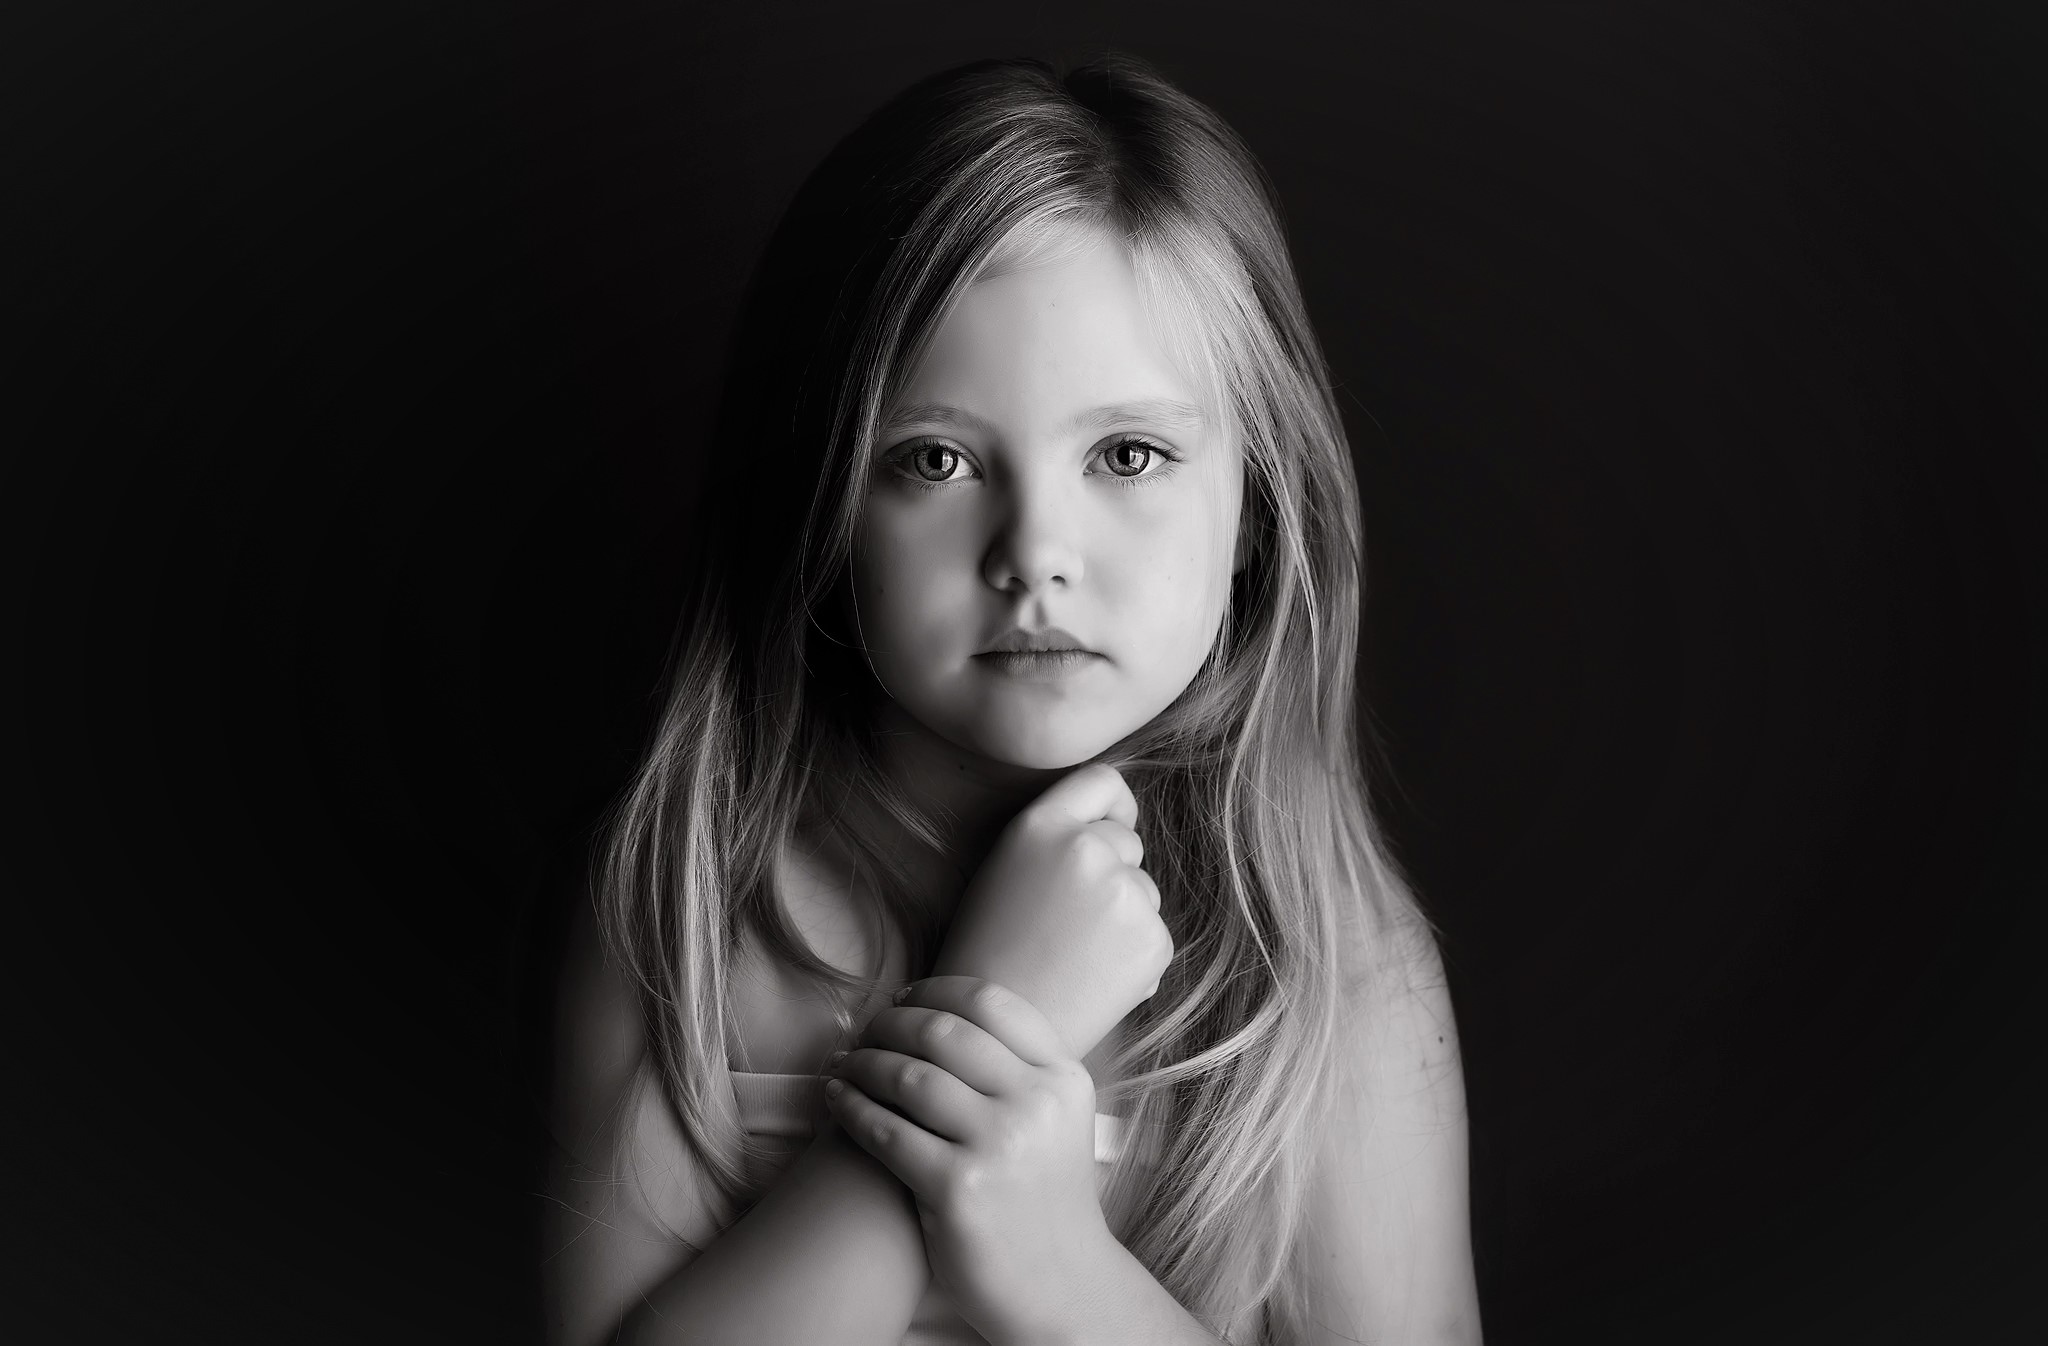 Cute Little Girl in Black and White by Meg Bitton